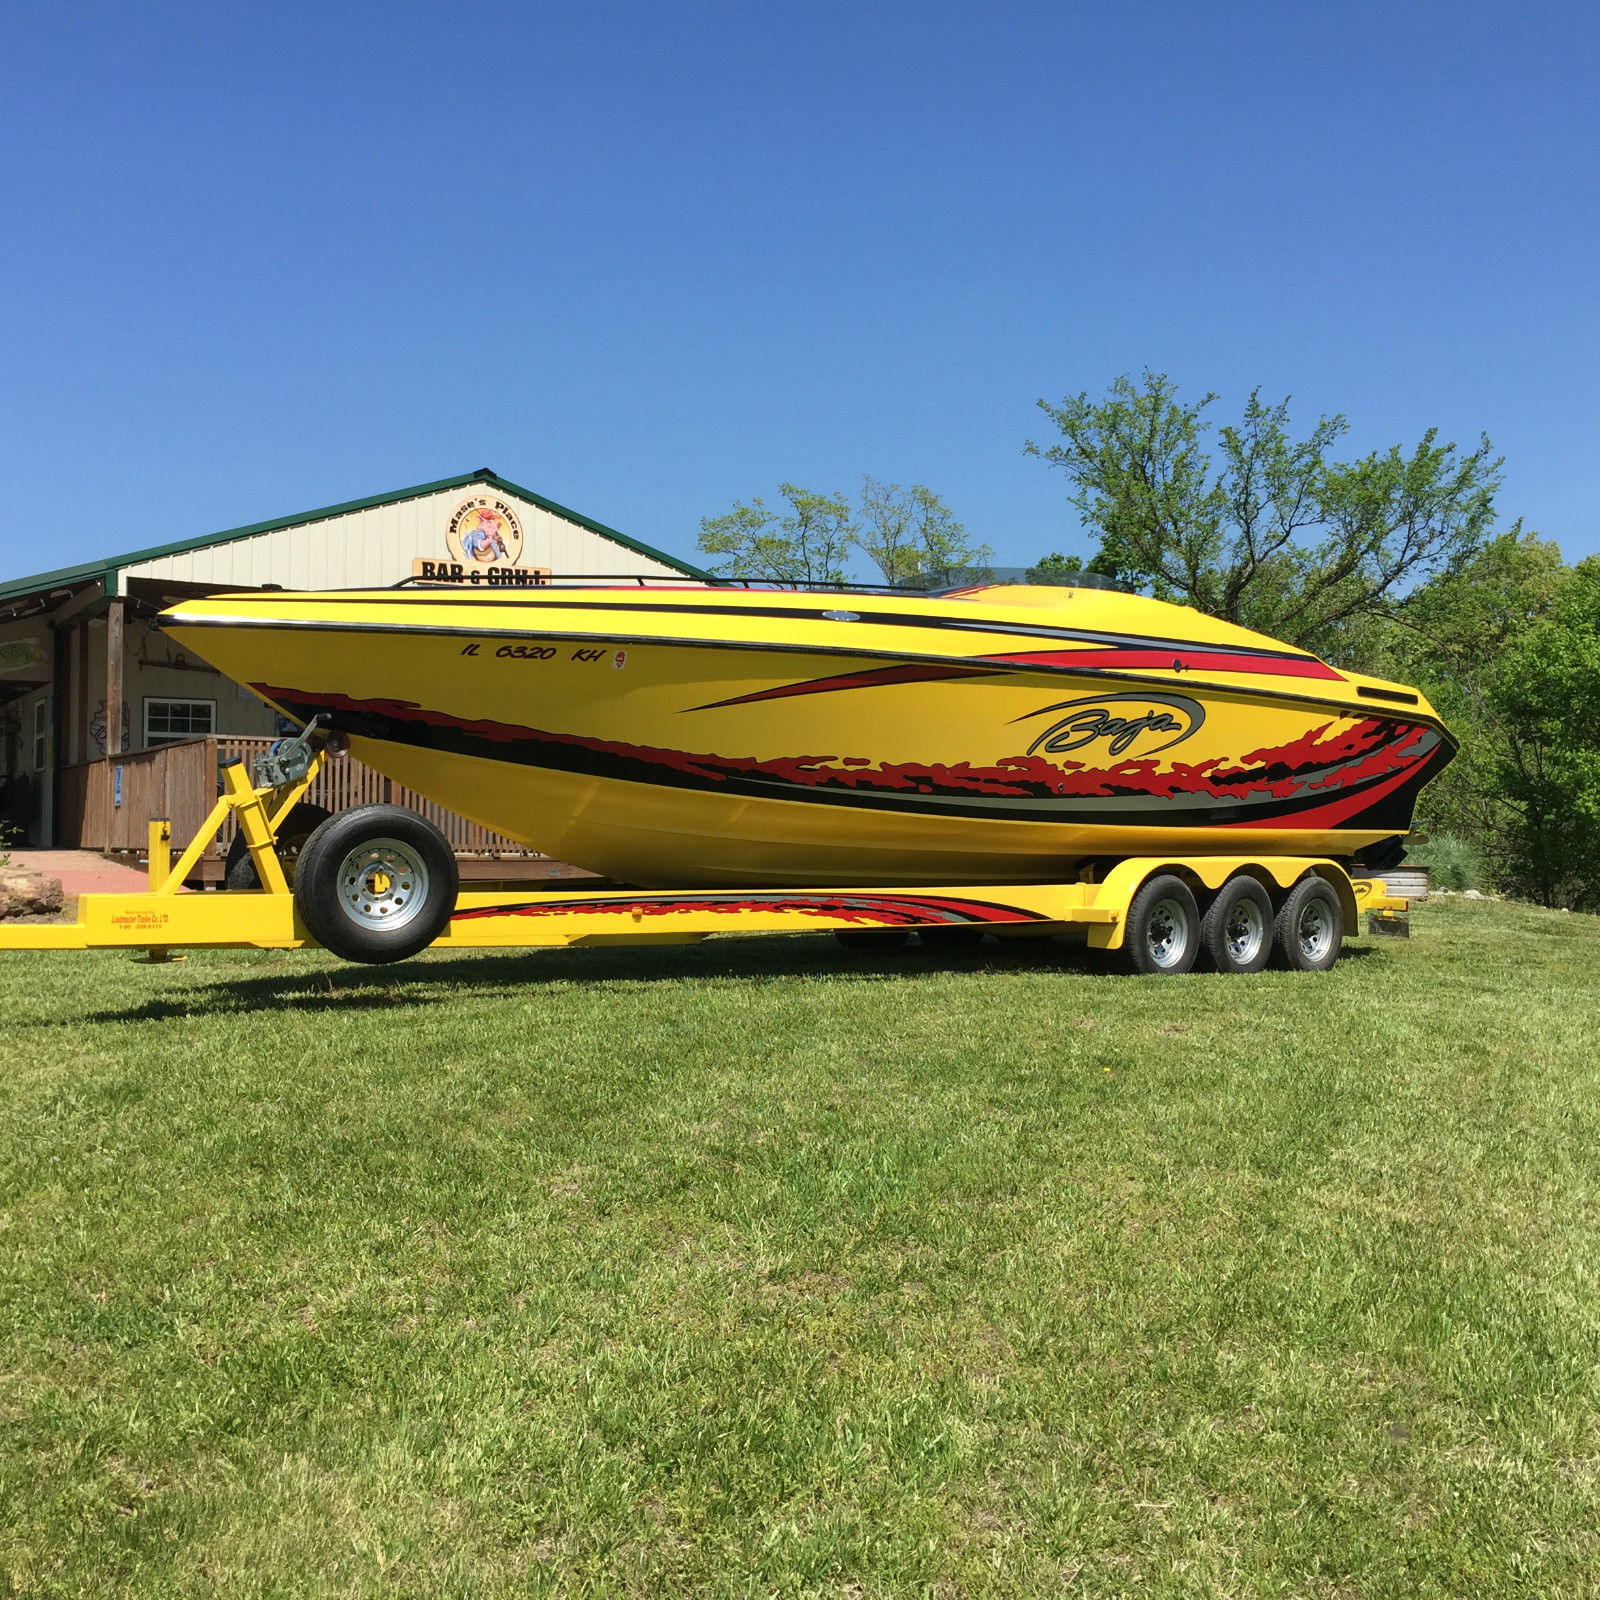 Baja 32 Outlaw Racing Express Cruiser 1990 for sale for $29,000.